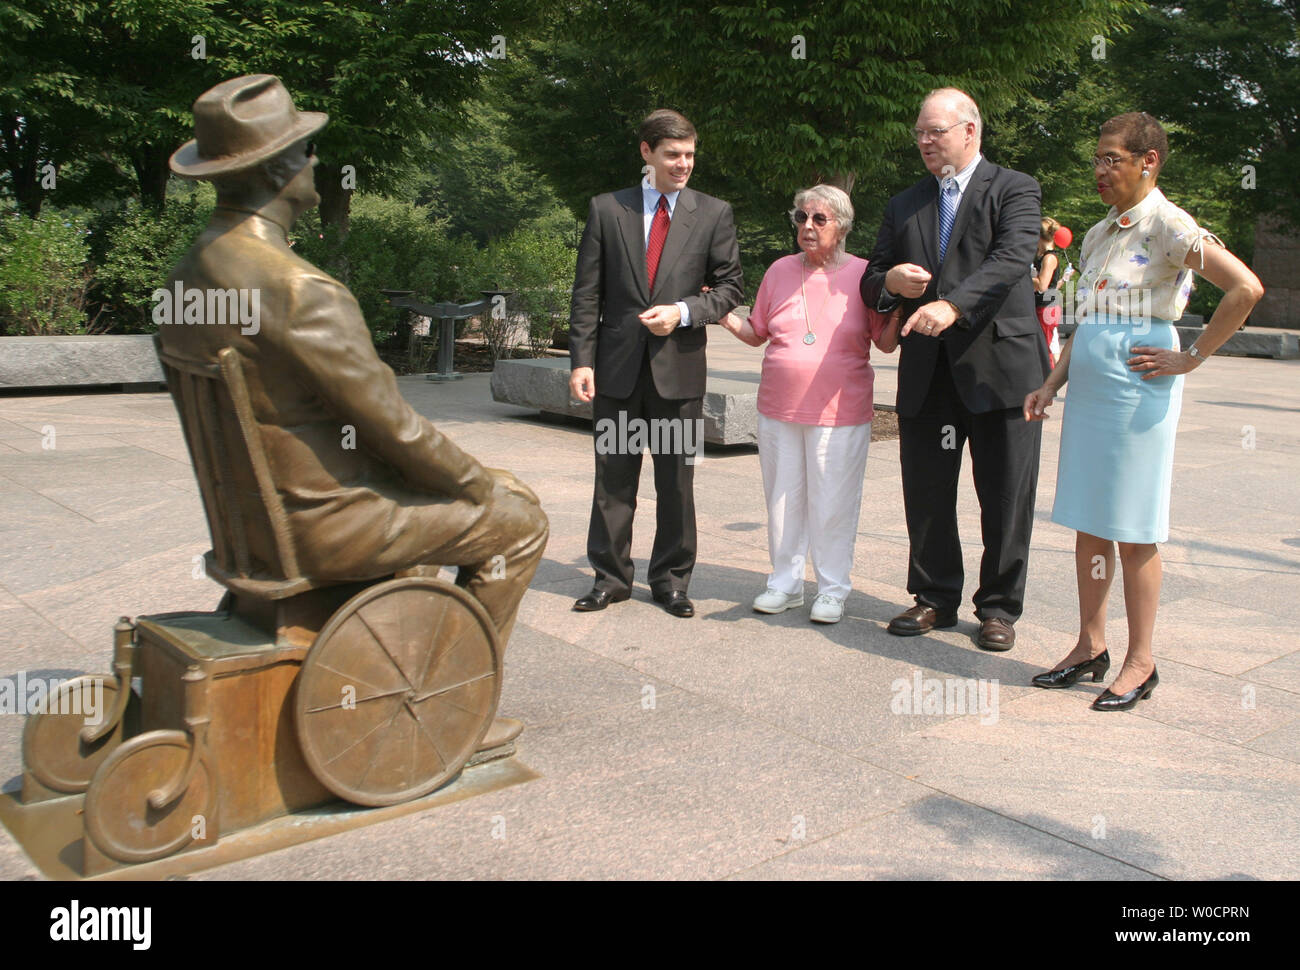 From the left, William A. Halter, former Deputy Commissioner and Acting Commissioner of Social Security under the Clinton Administration, Winnie Pineo a 97 year-old Vermont native and Social Security dependent, James Roosevelt, JR. grandson of President Franklin D. Roosevelt, and Congresswoman Eleanor Holmes Norton (D-DC), tour the FDR Memorial at a ceremony to kick off nationwide celebrations of the 70th anniversary of Social Security, at the FDR Memorial, in Washington, on Aug. 12, 2005. (UPI Photo/Kevin Dietsch) Stock Photo